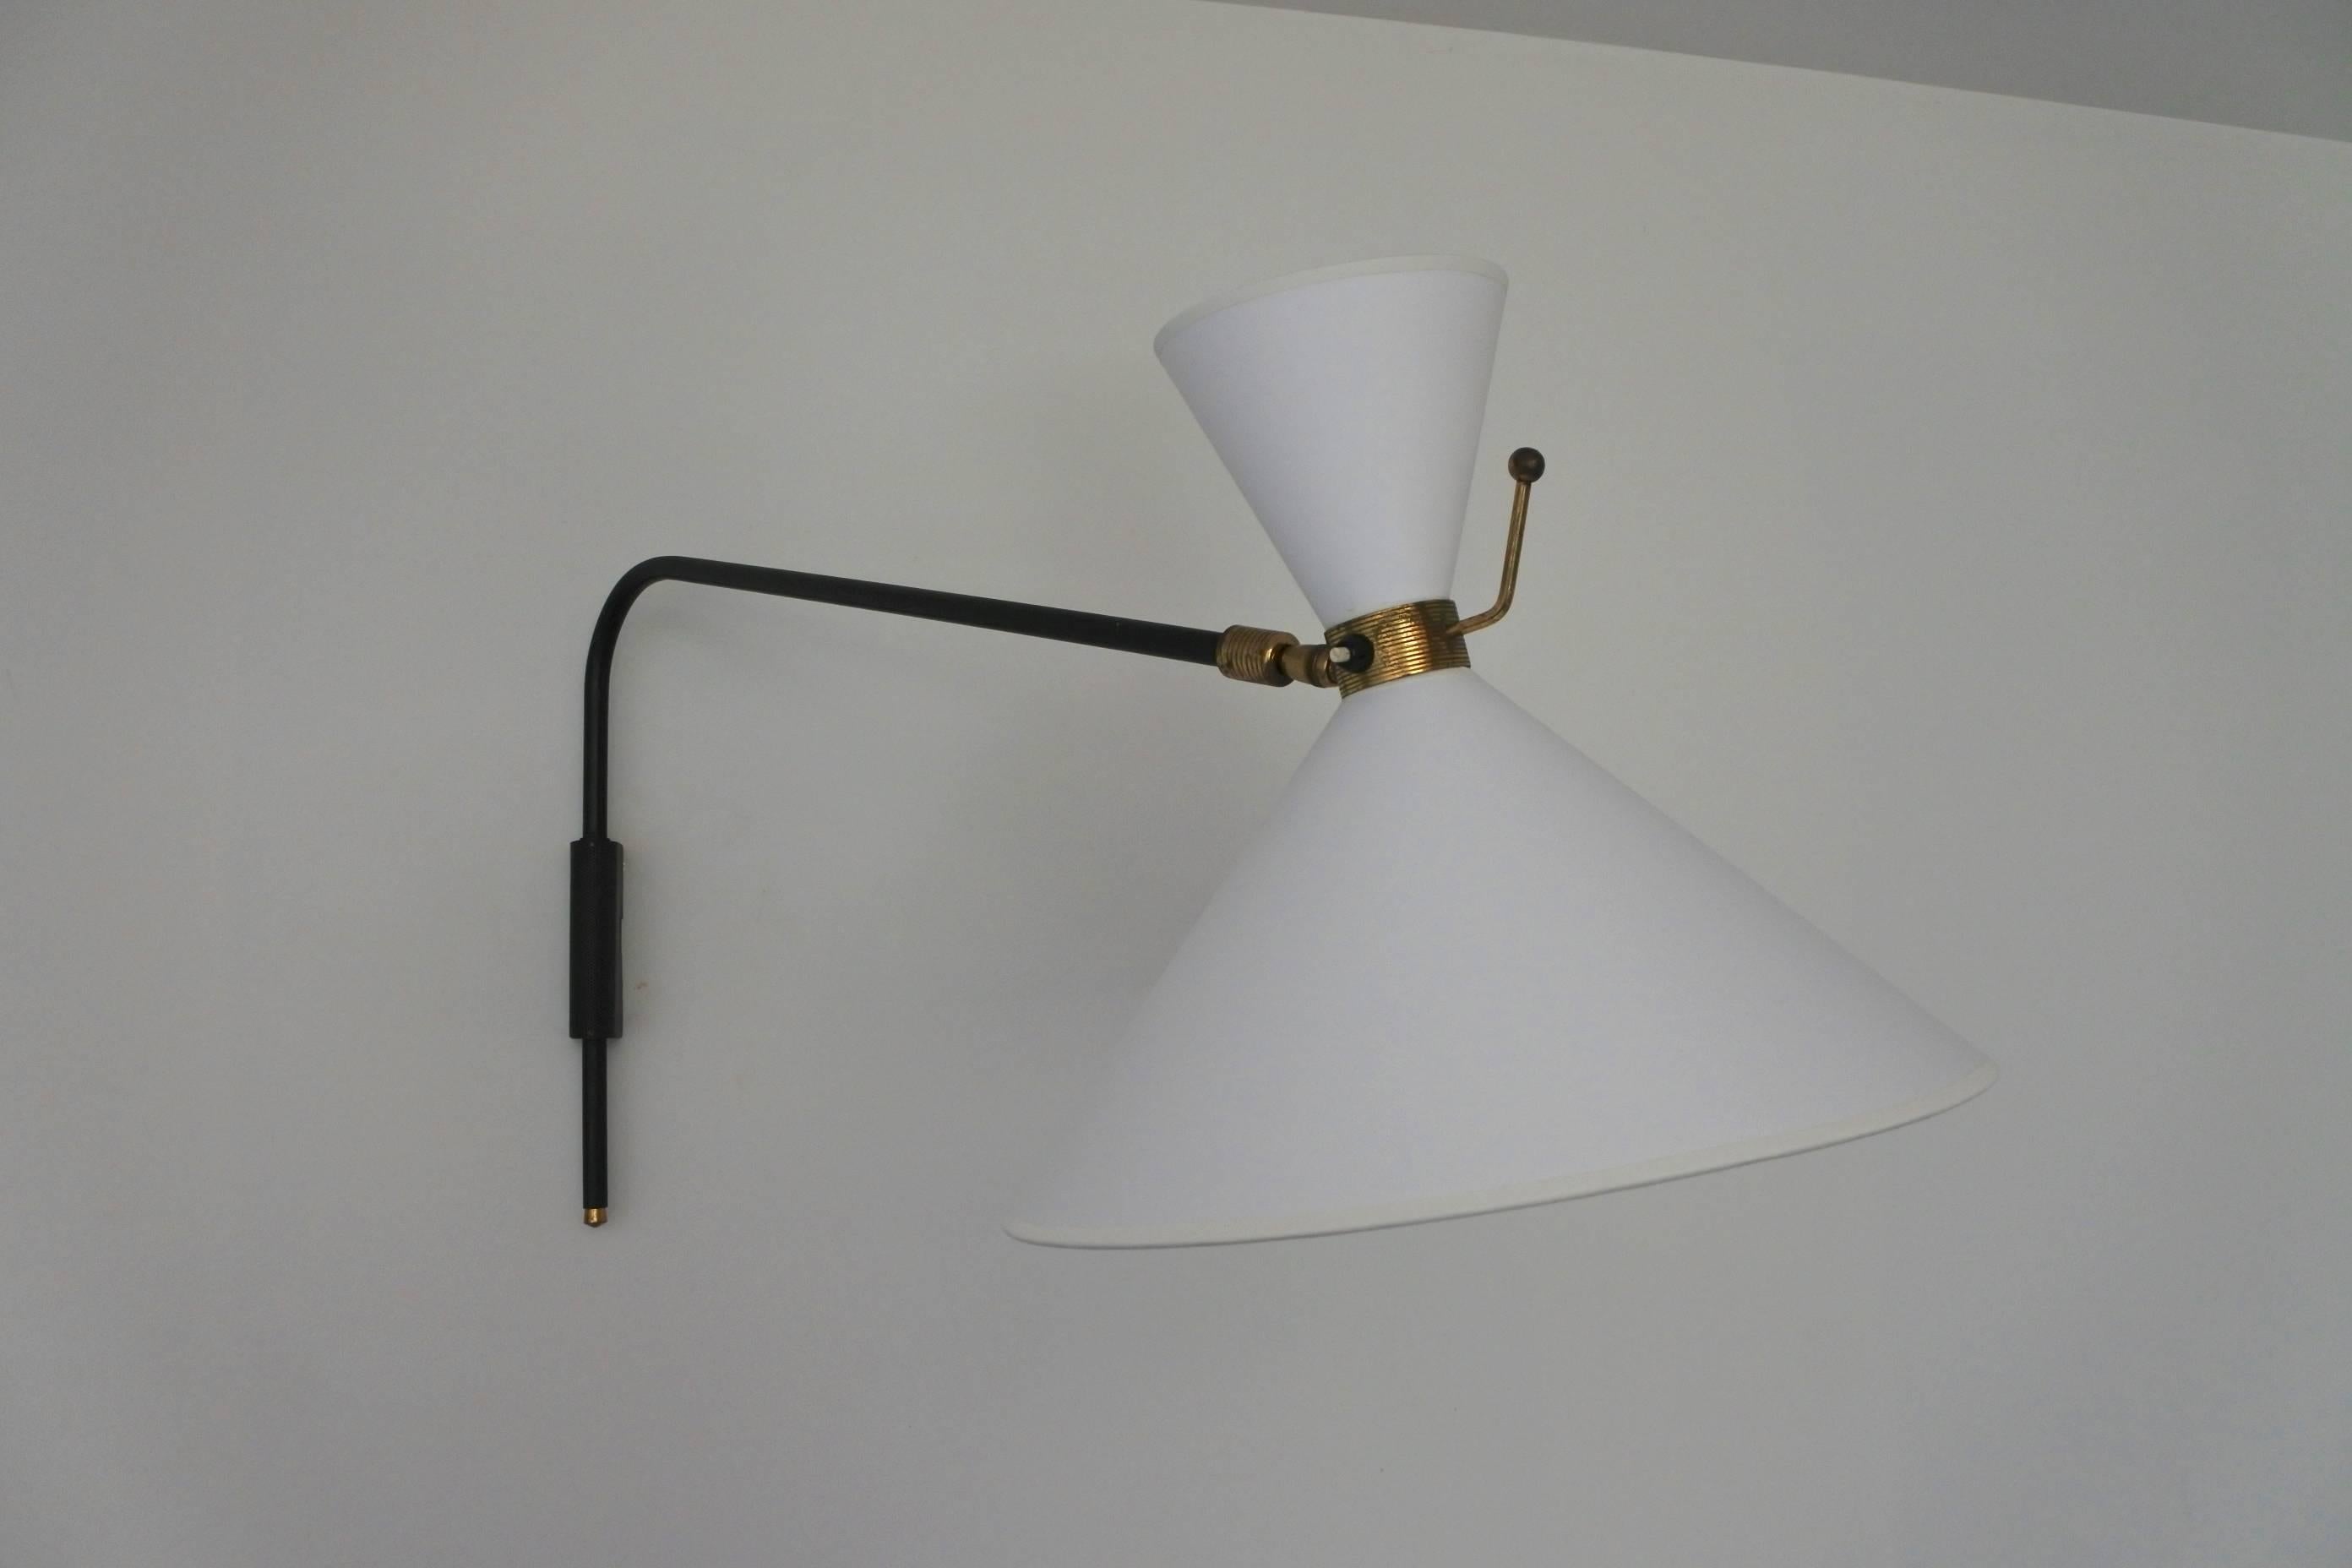 Swing arm and extensible wall lamp by French lighting manufacturer Arlus.
Made from lacquered tubular and perforated metal and brass.
The lamp features two independent switches and bulbs. 
The shade can be orientated in all directions.
The brass